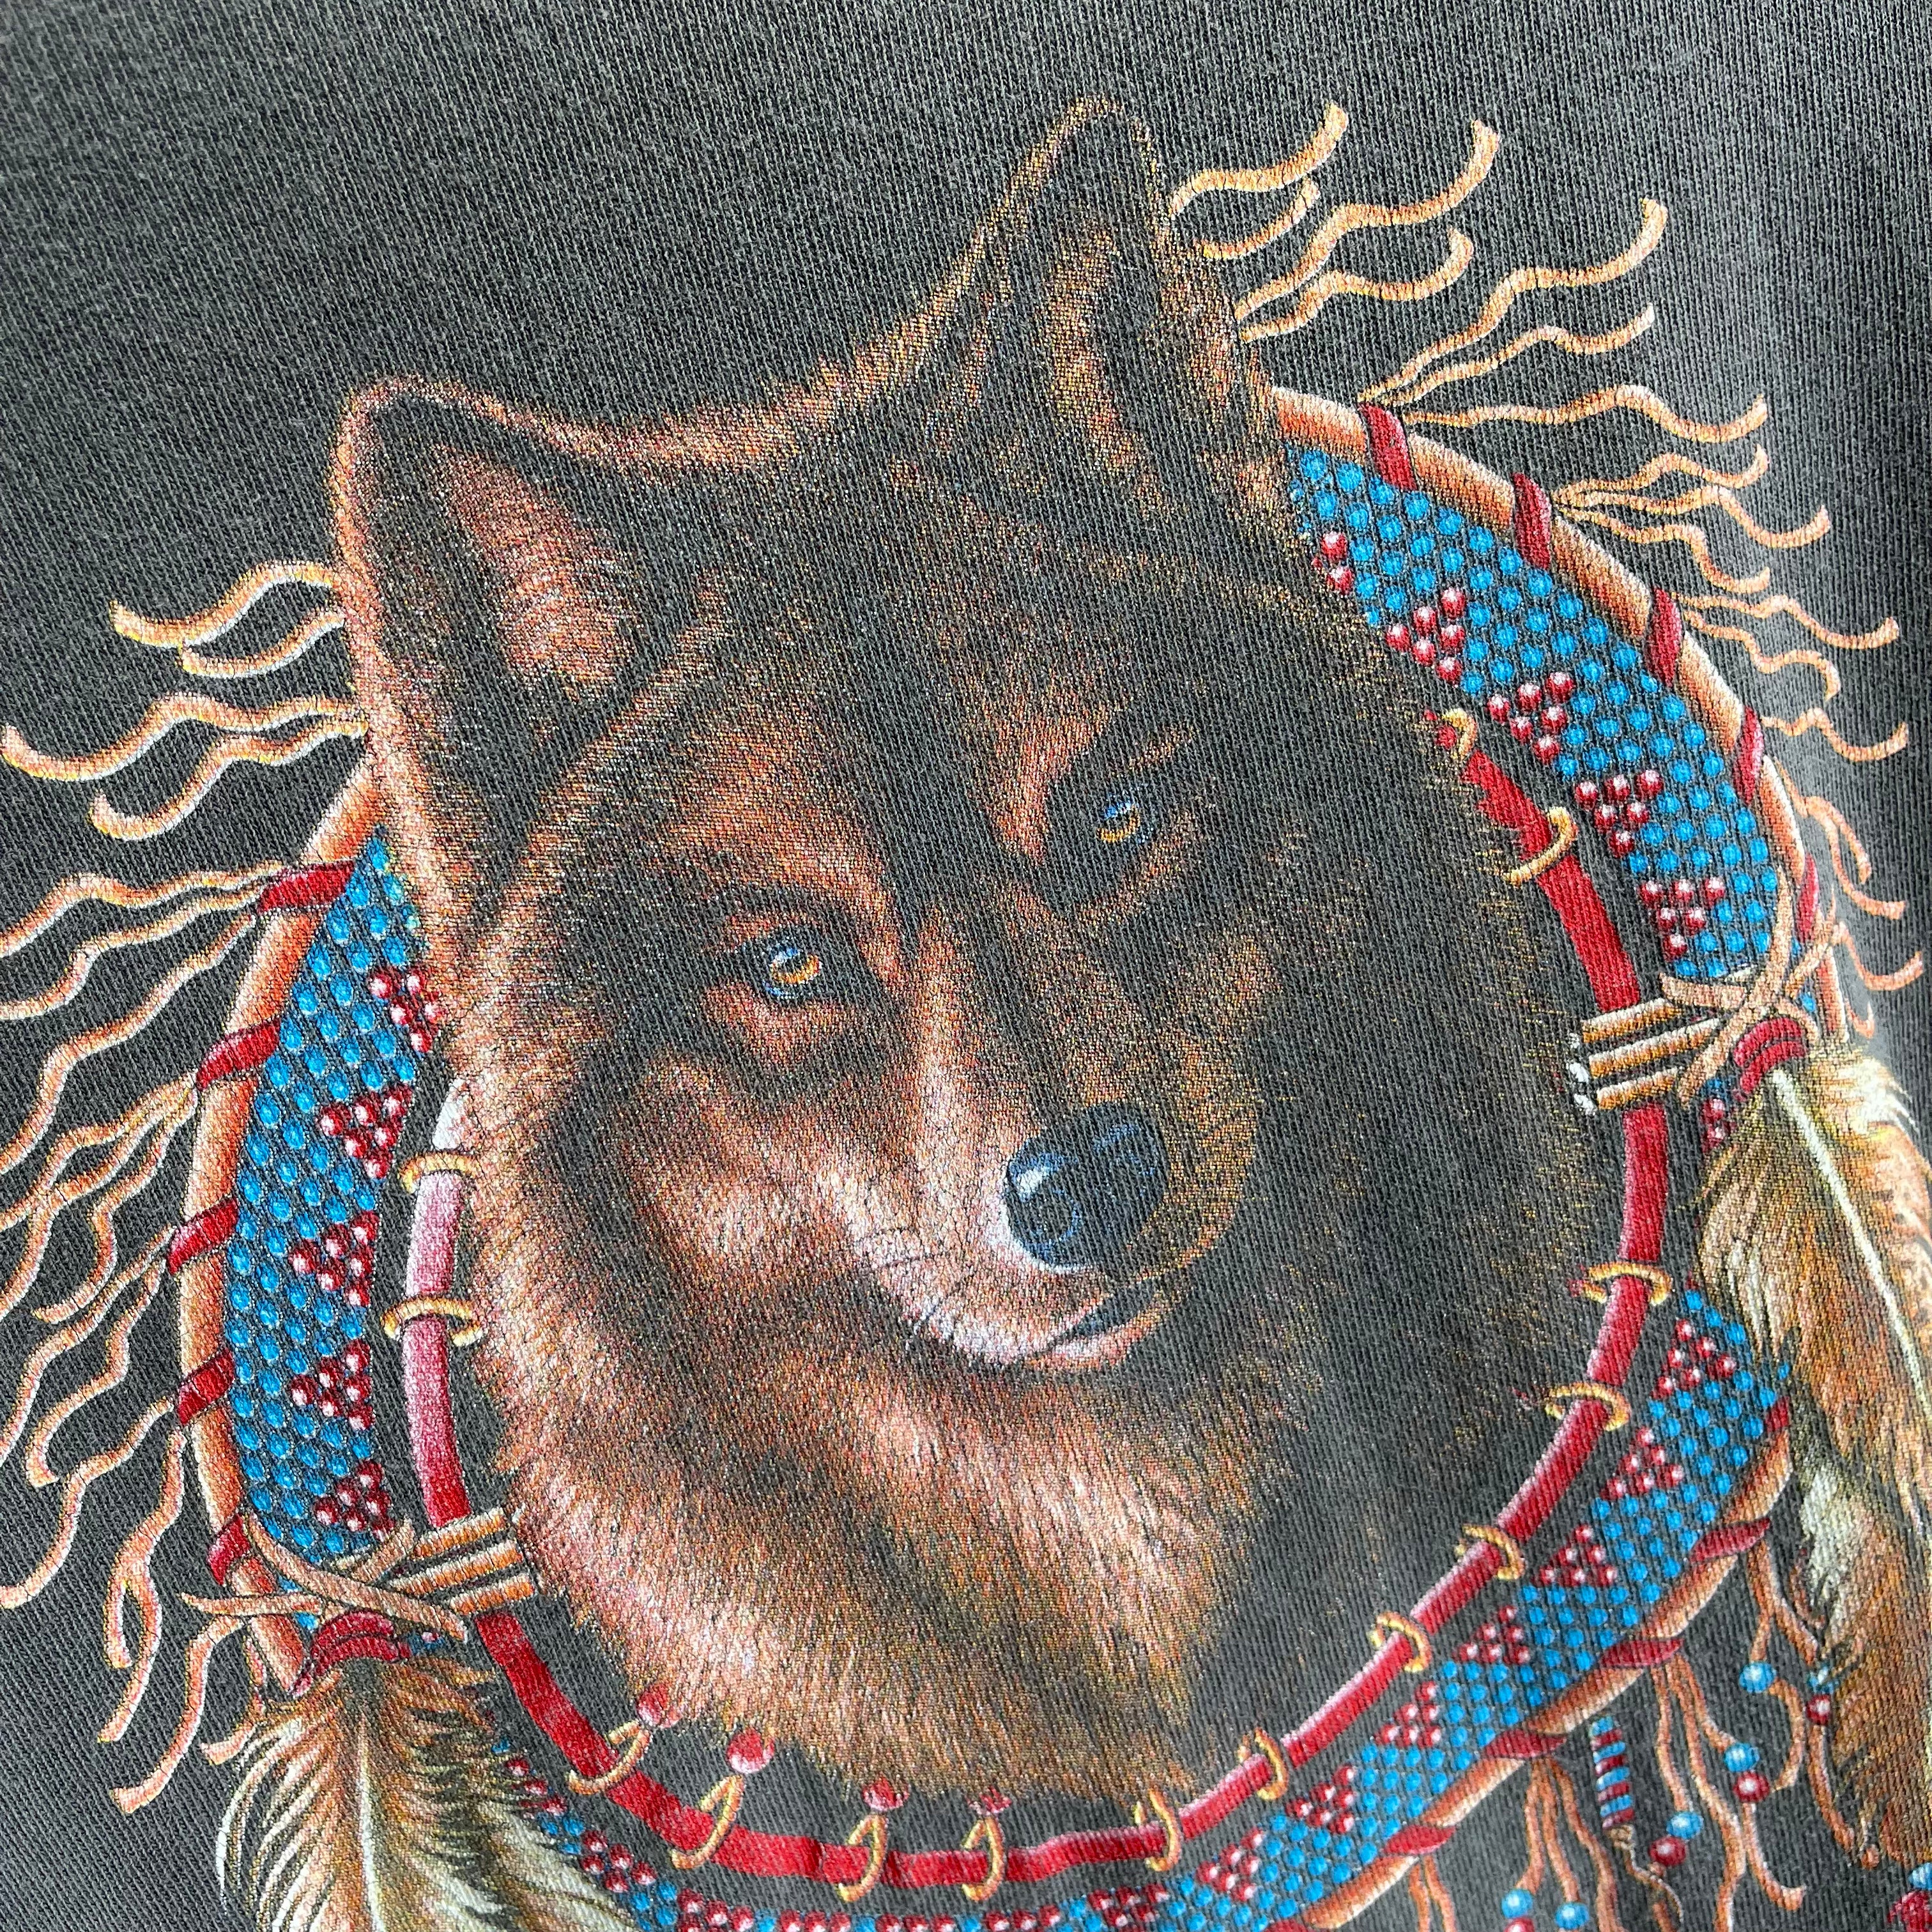 1990s Wolf in a Dream Catcher Relaxed Fit T-Shirt